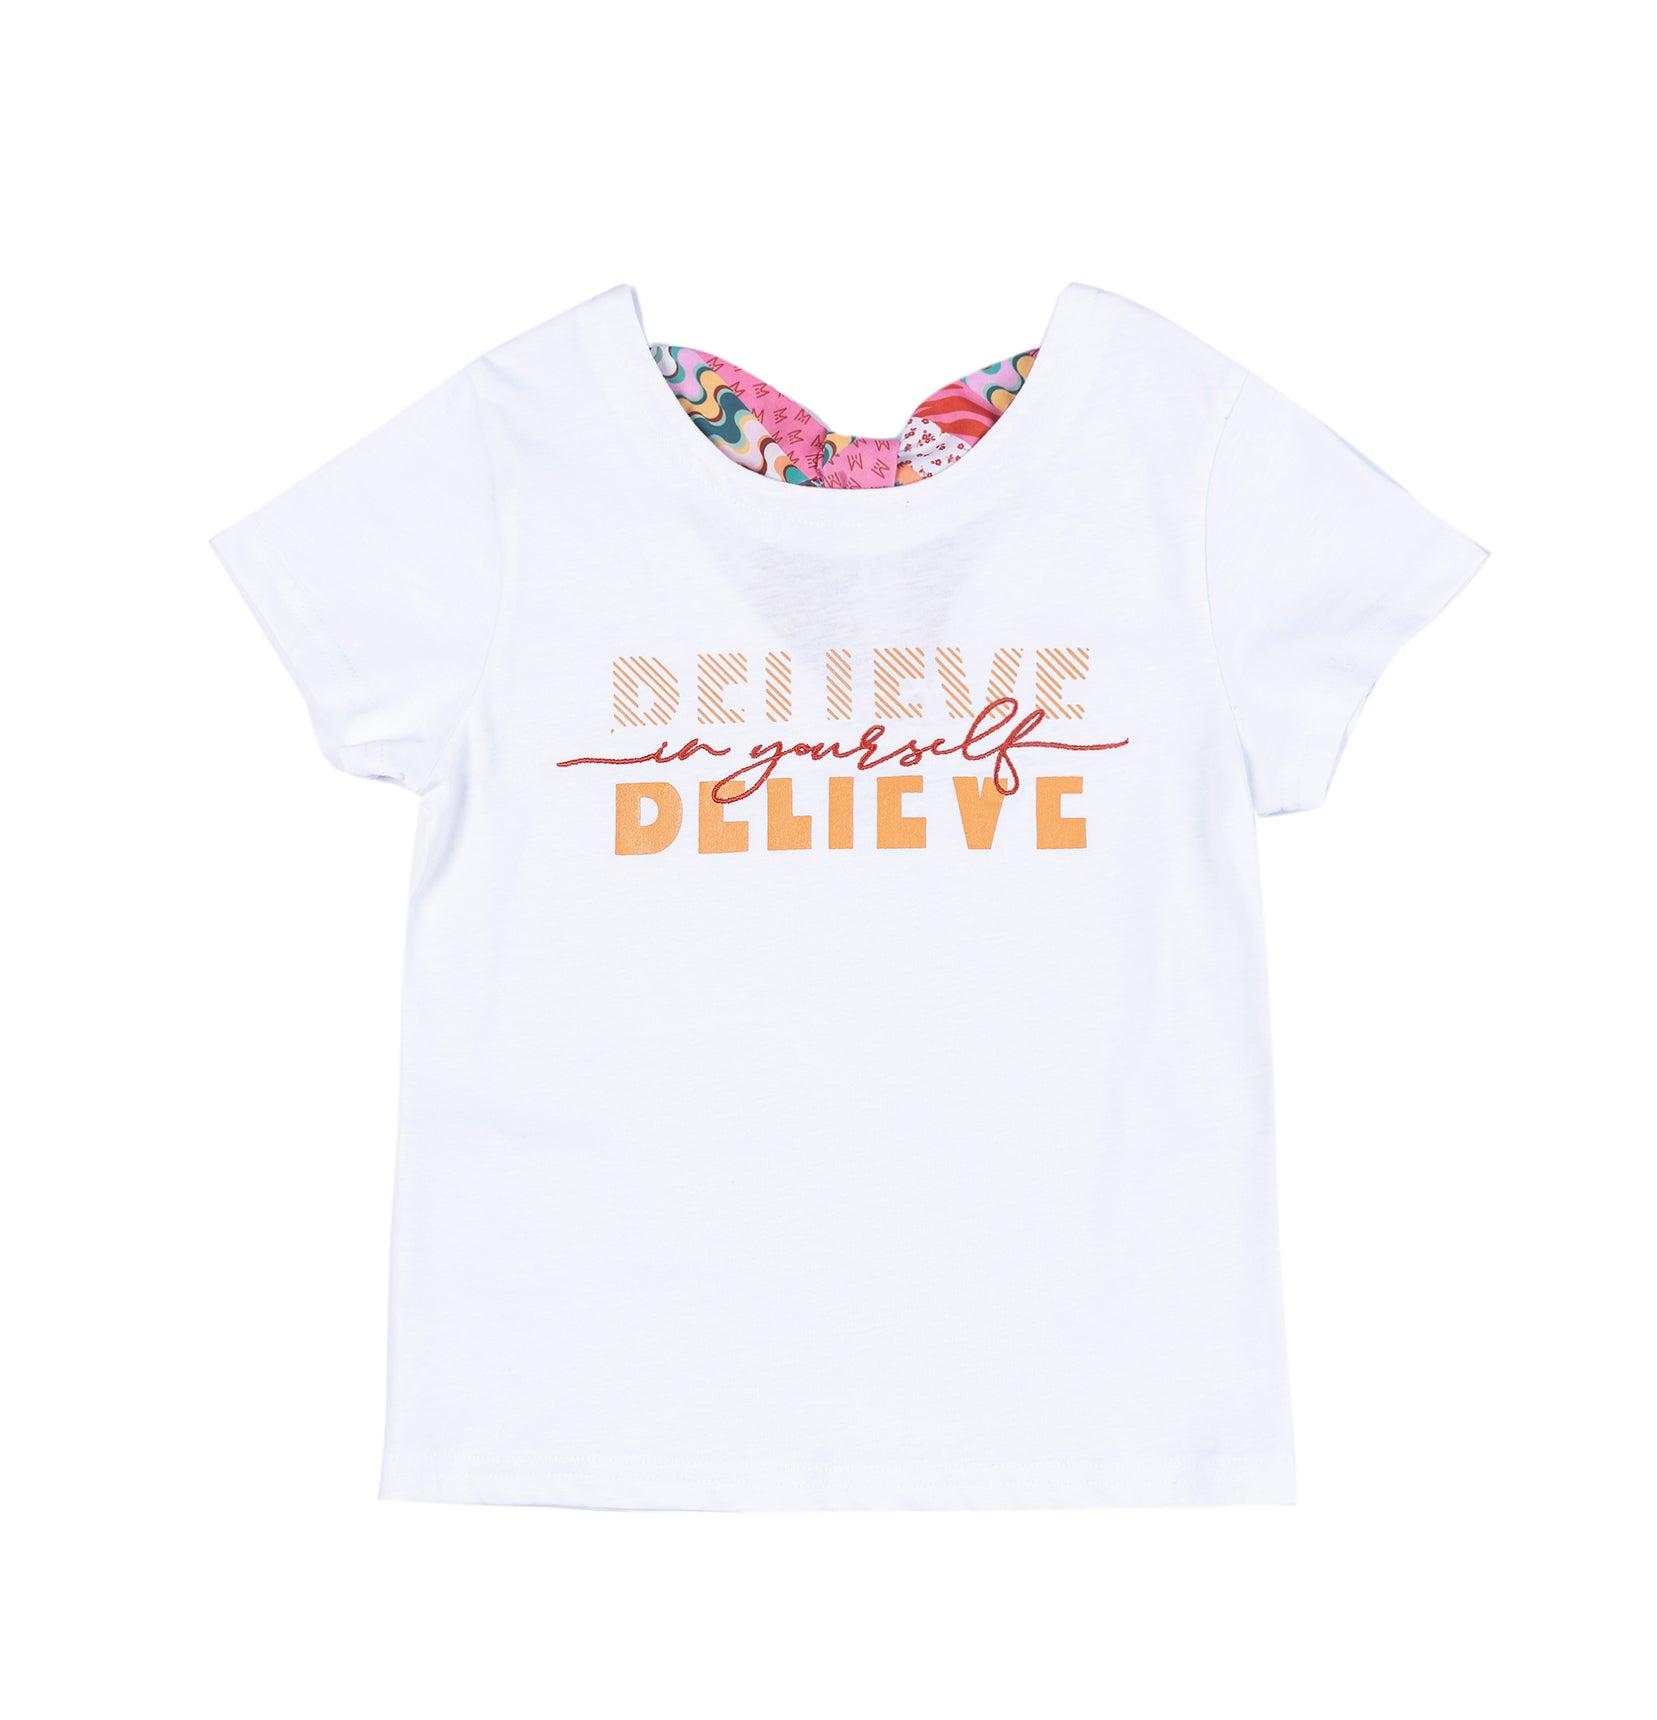 Believe in yourself white half sleeve shirt by Pompelo